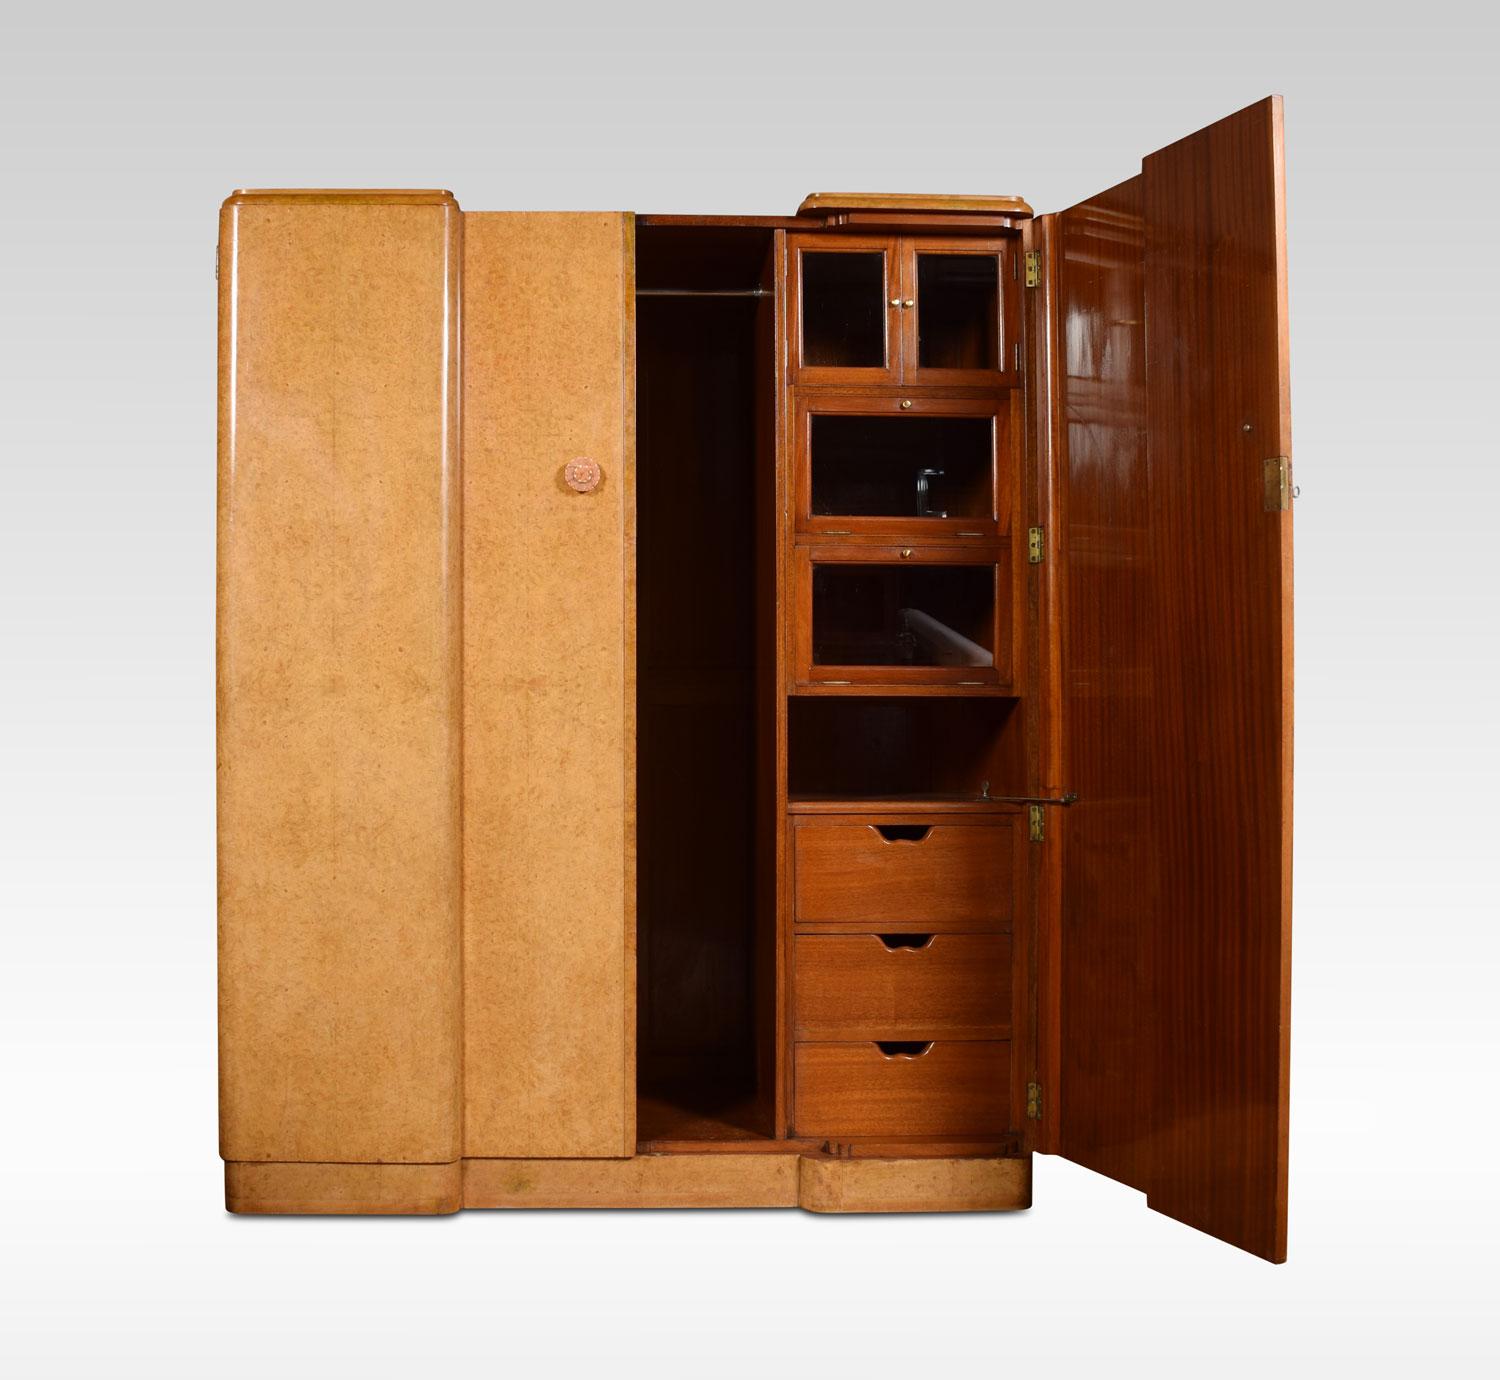 Large burr walnut Art Deco wardrobe, the two doors with Bakelite handles, opening to reveal fitted glazed compartments, drawers and hanging space. All raised up on plinth base (attributed to Harry and Lou Epstein
Dimensions:
Height 73.5 inches
Width